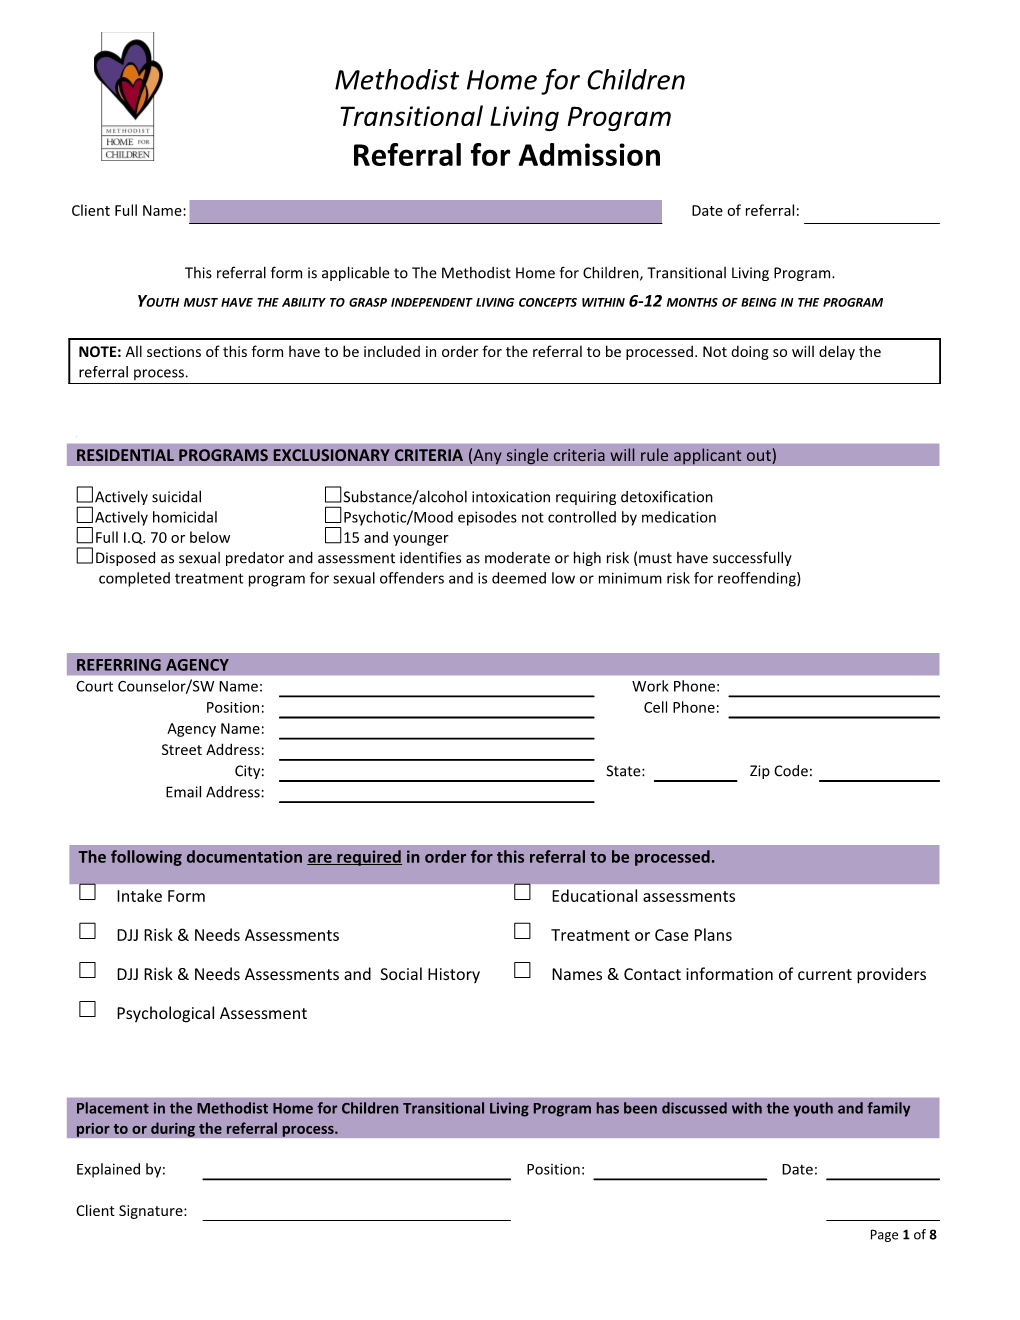 Referral for Admission